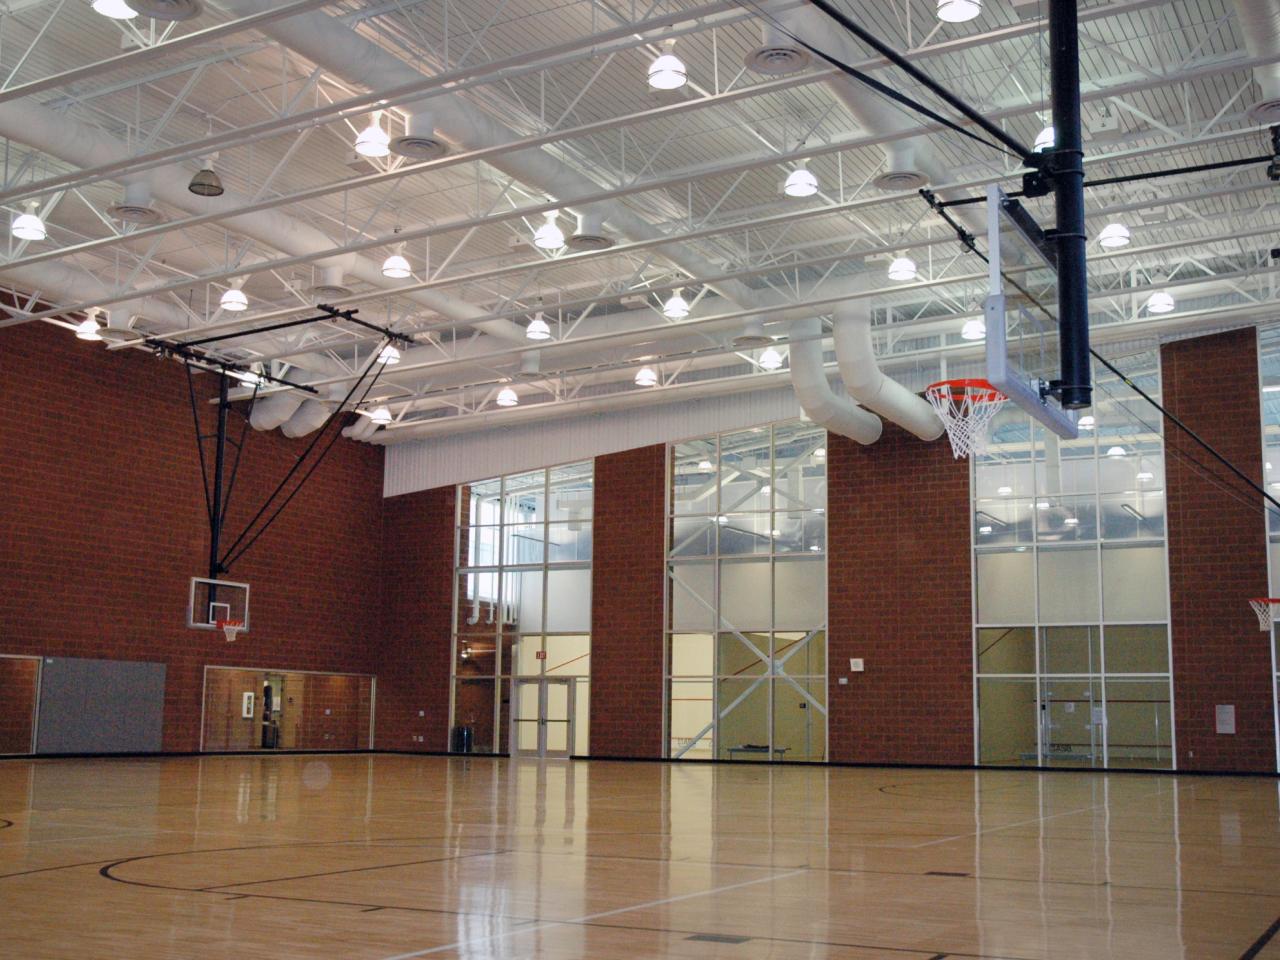 Two-floor basketball court at RPAC